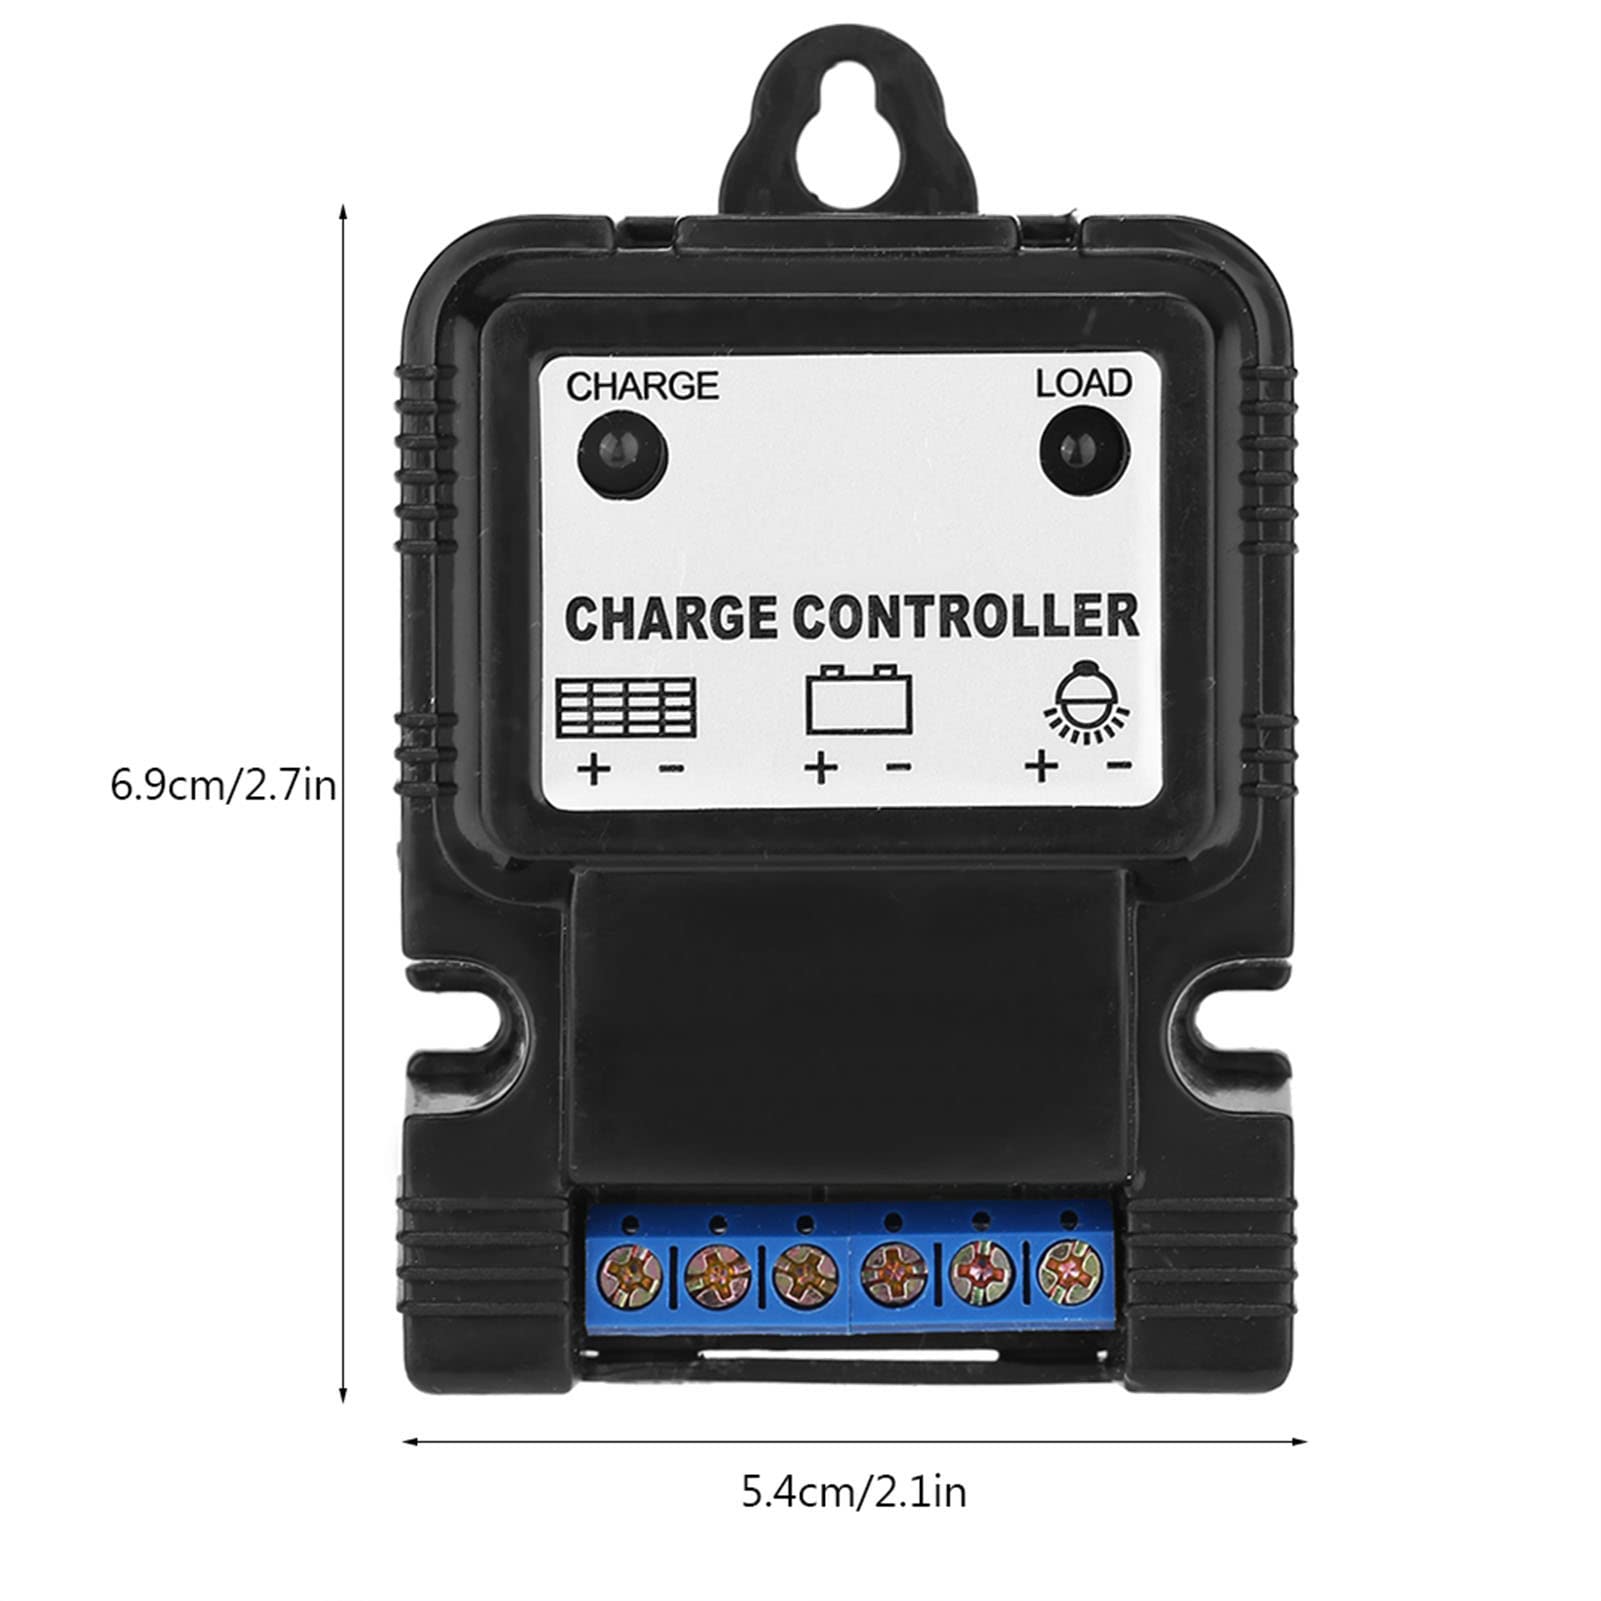 Solar Controller,Plastic PWM 6V/12V 3A Portable Solar Panel Charger Controller Regulator with LED Indicator New